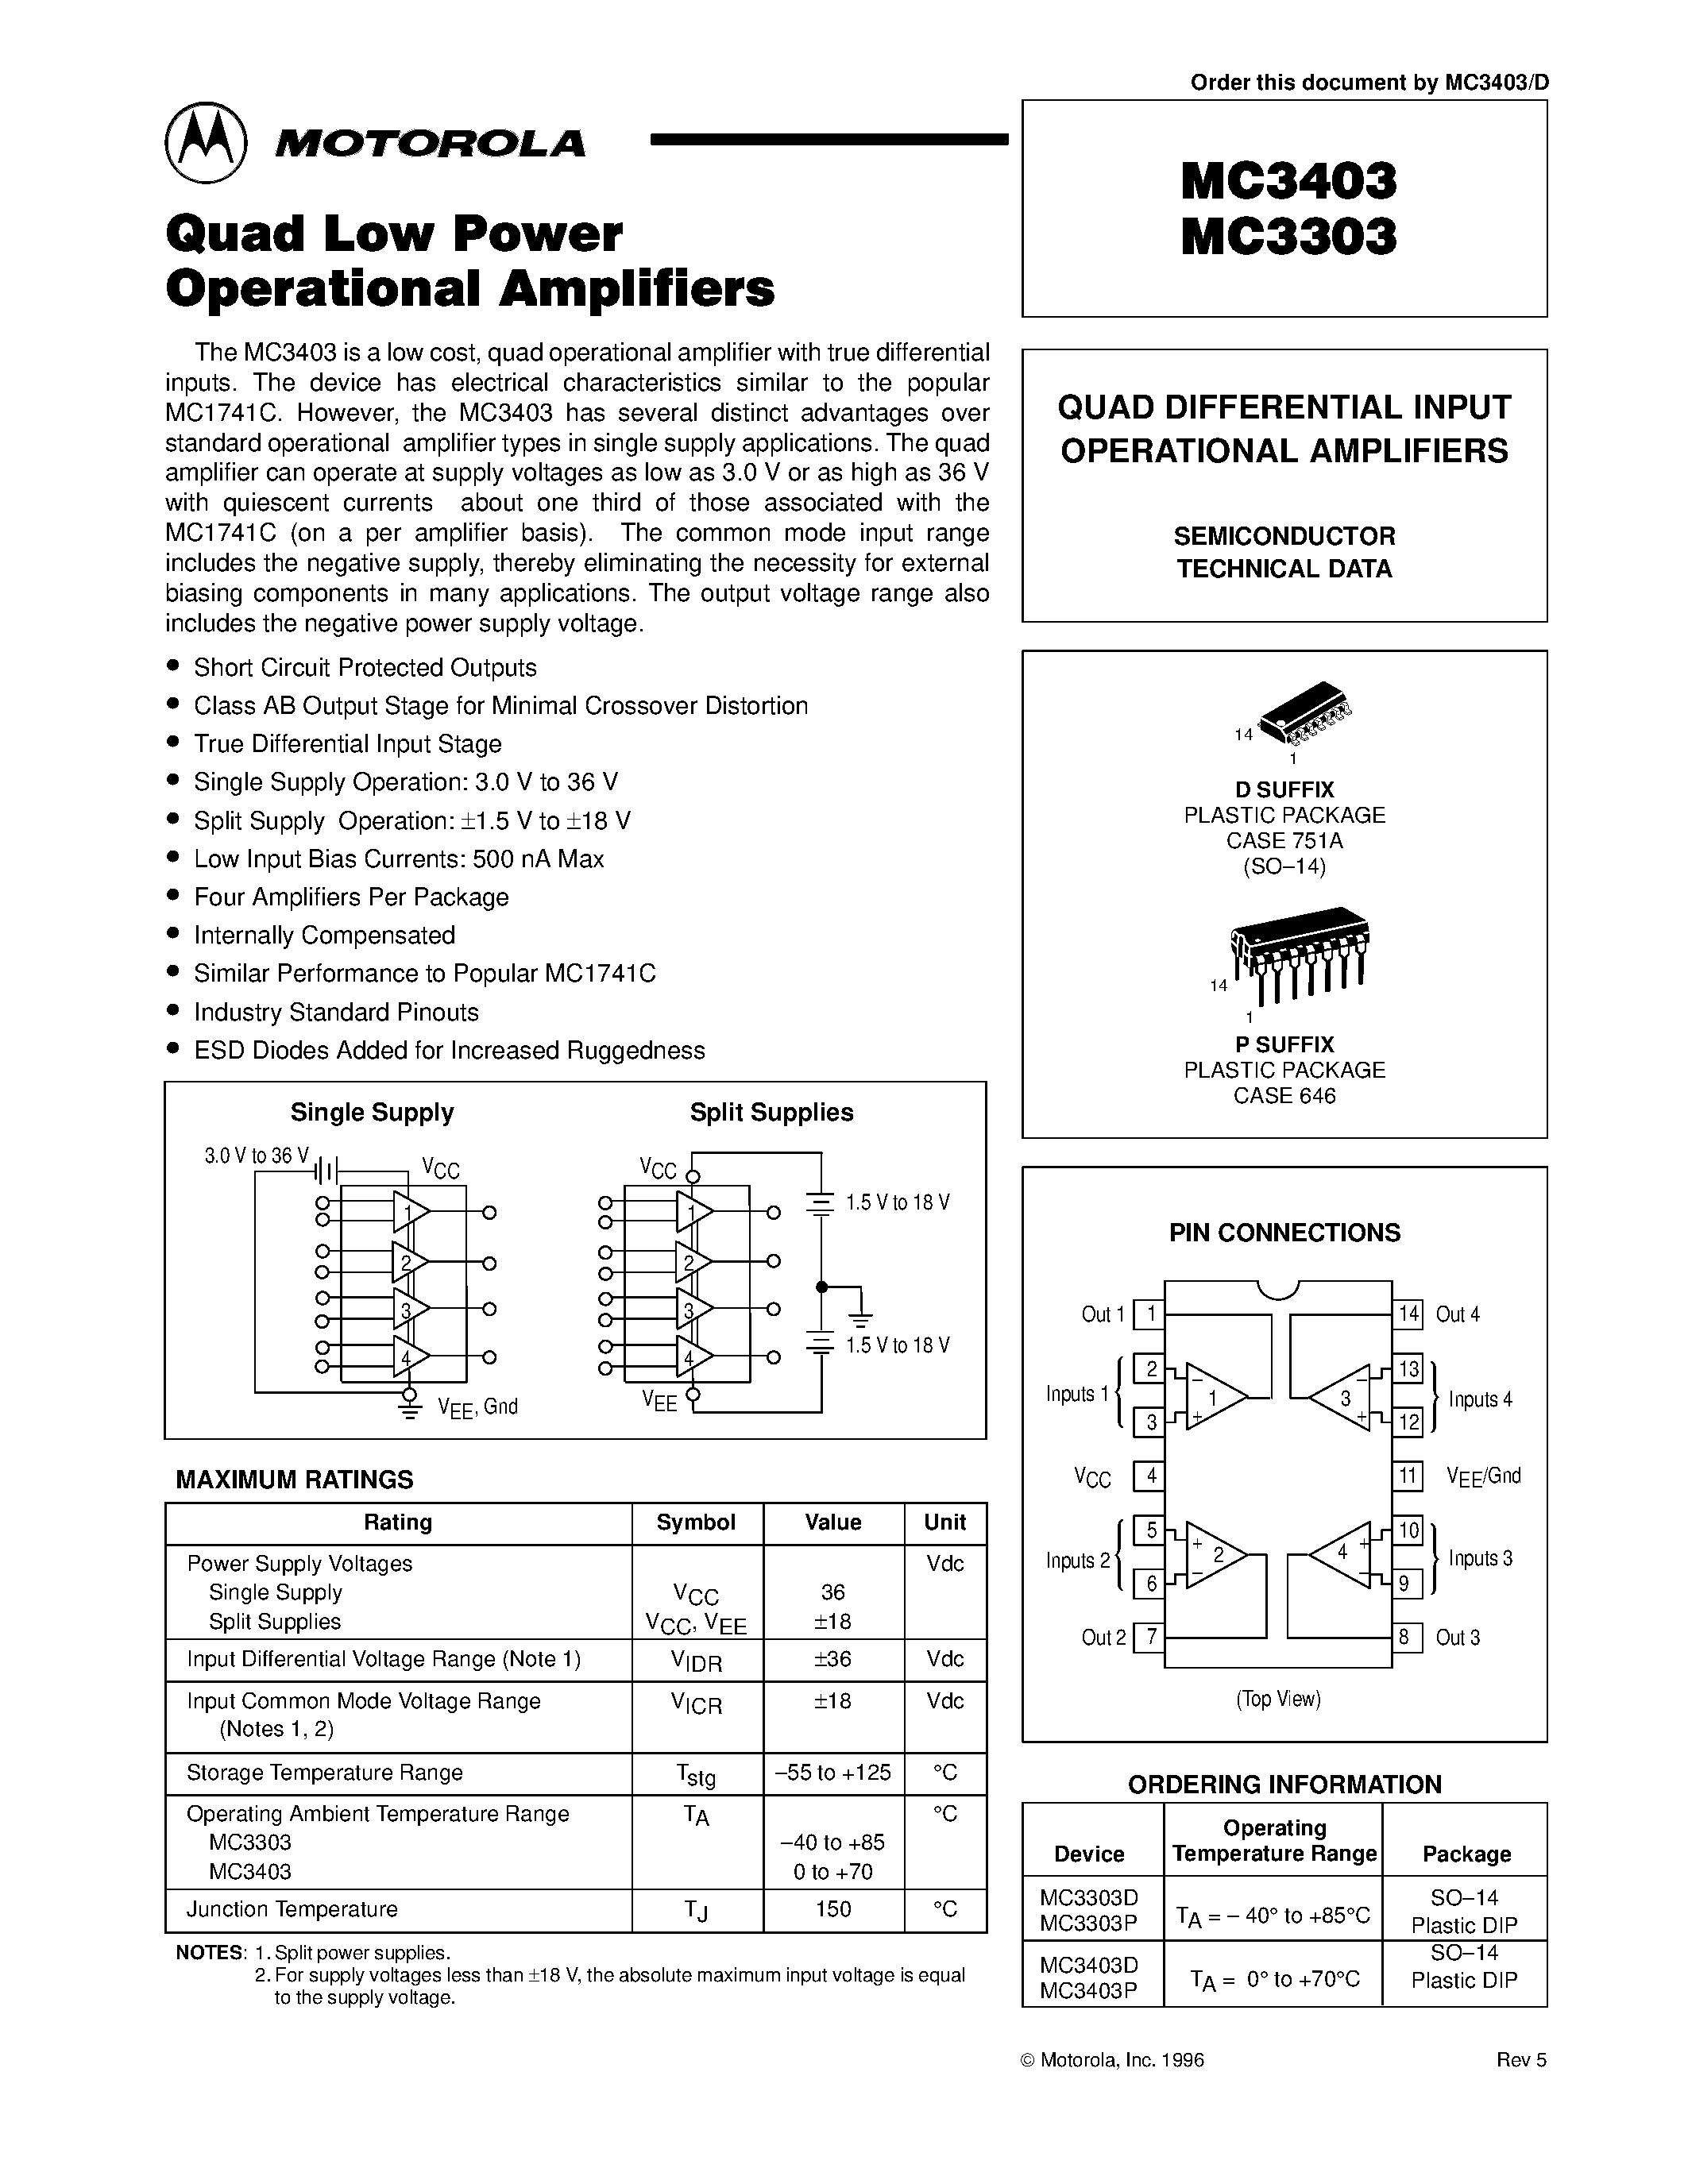 Datasheet MC3403 - QUAD DIFFERENTIAL INPUT OPERATIONAL AMPLIFIERS page 1